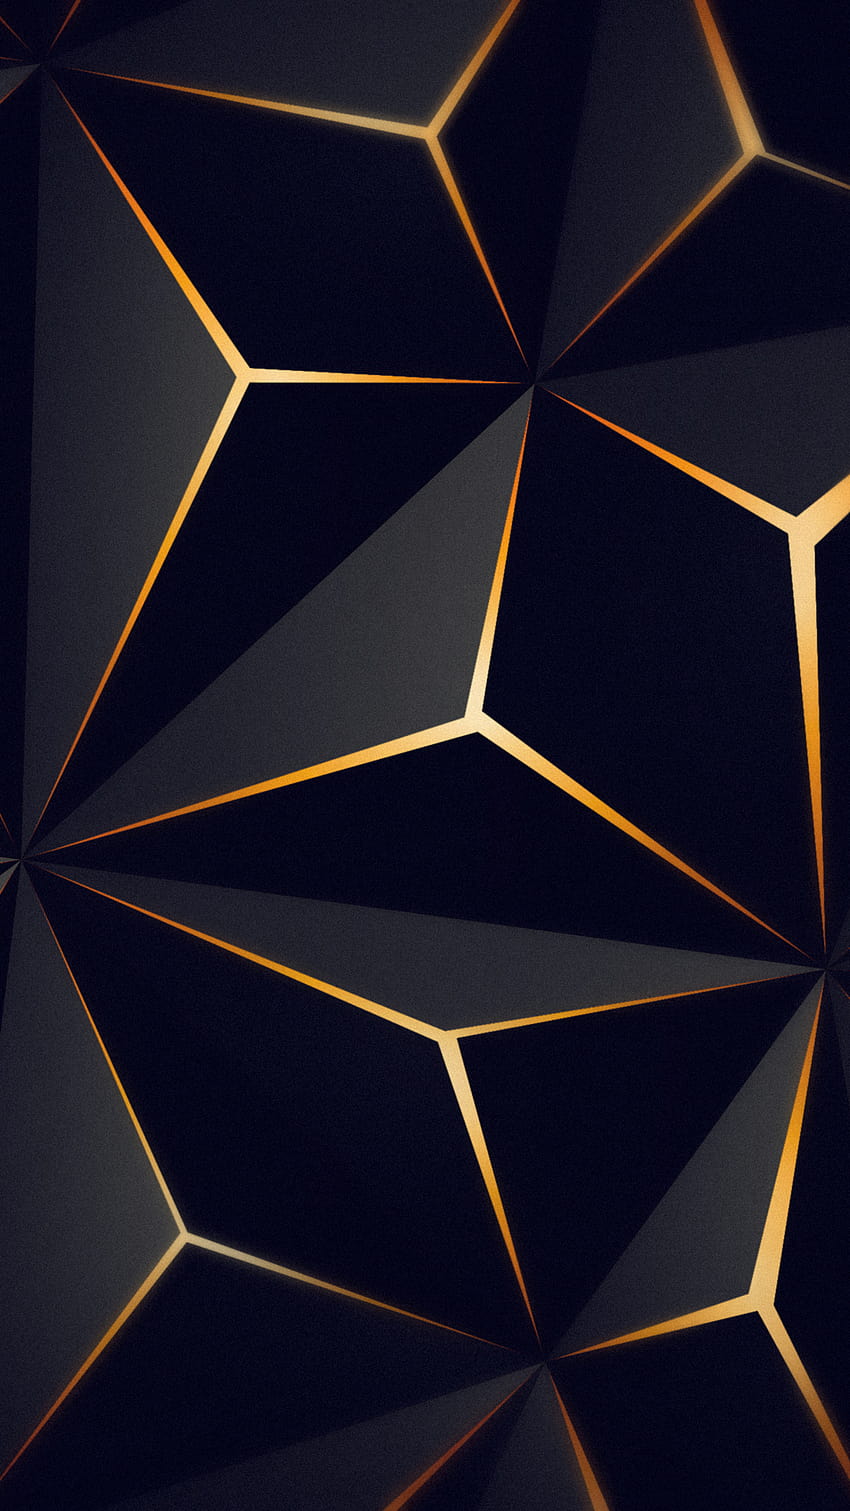 2160x3840 Triangle Solid Black Gold Sony Xperia X,XZ,Z5 Premium , Backgrounds, and, ultra premium HD phone wallpaper